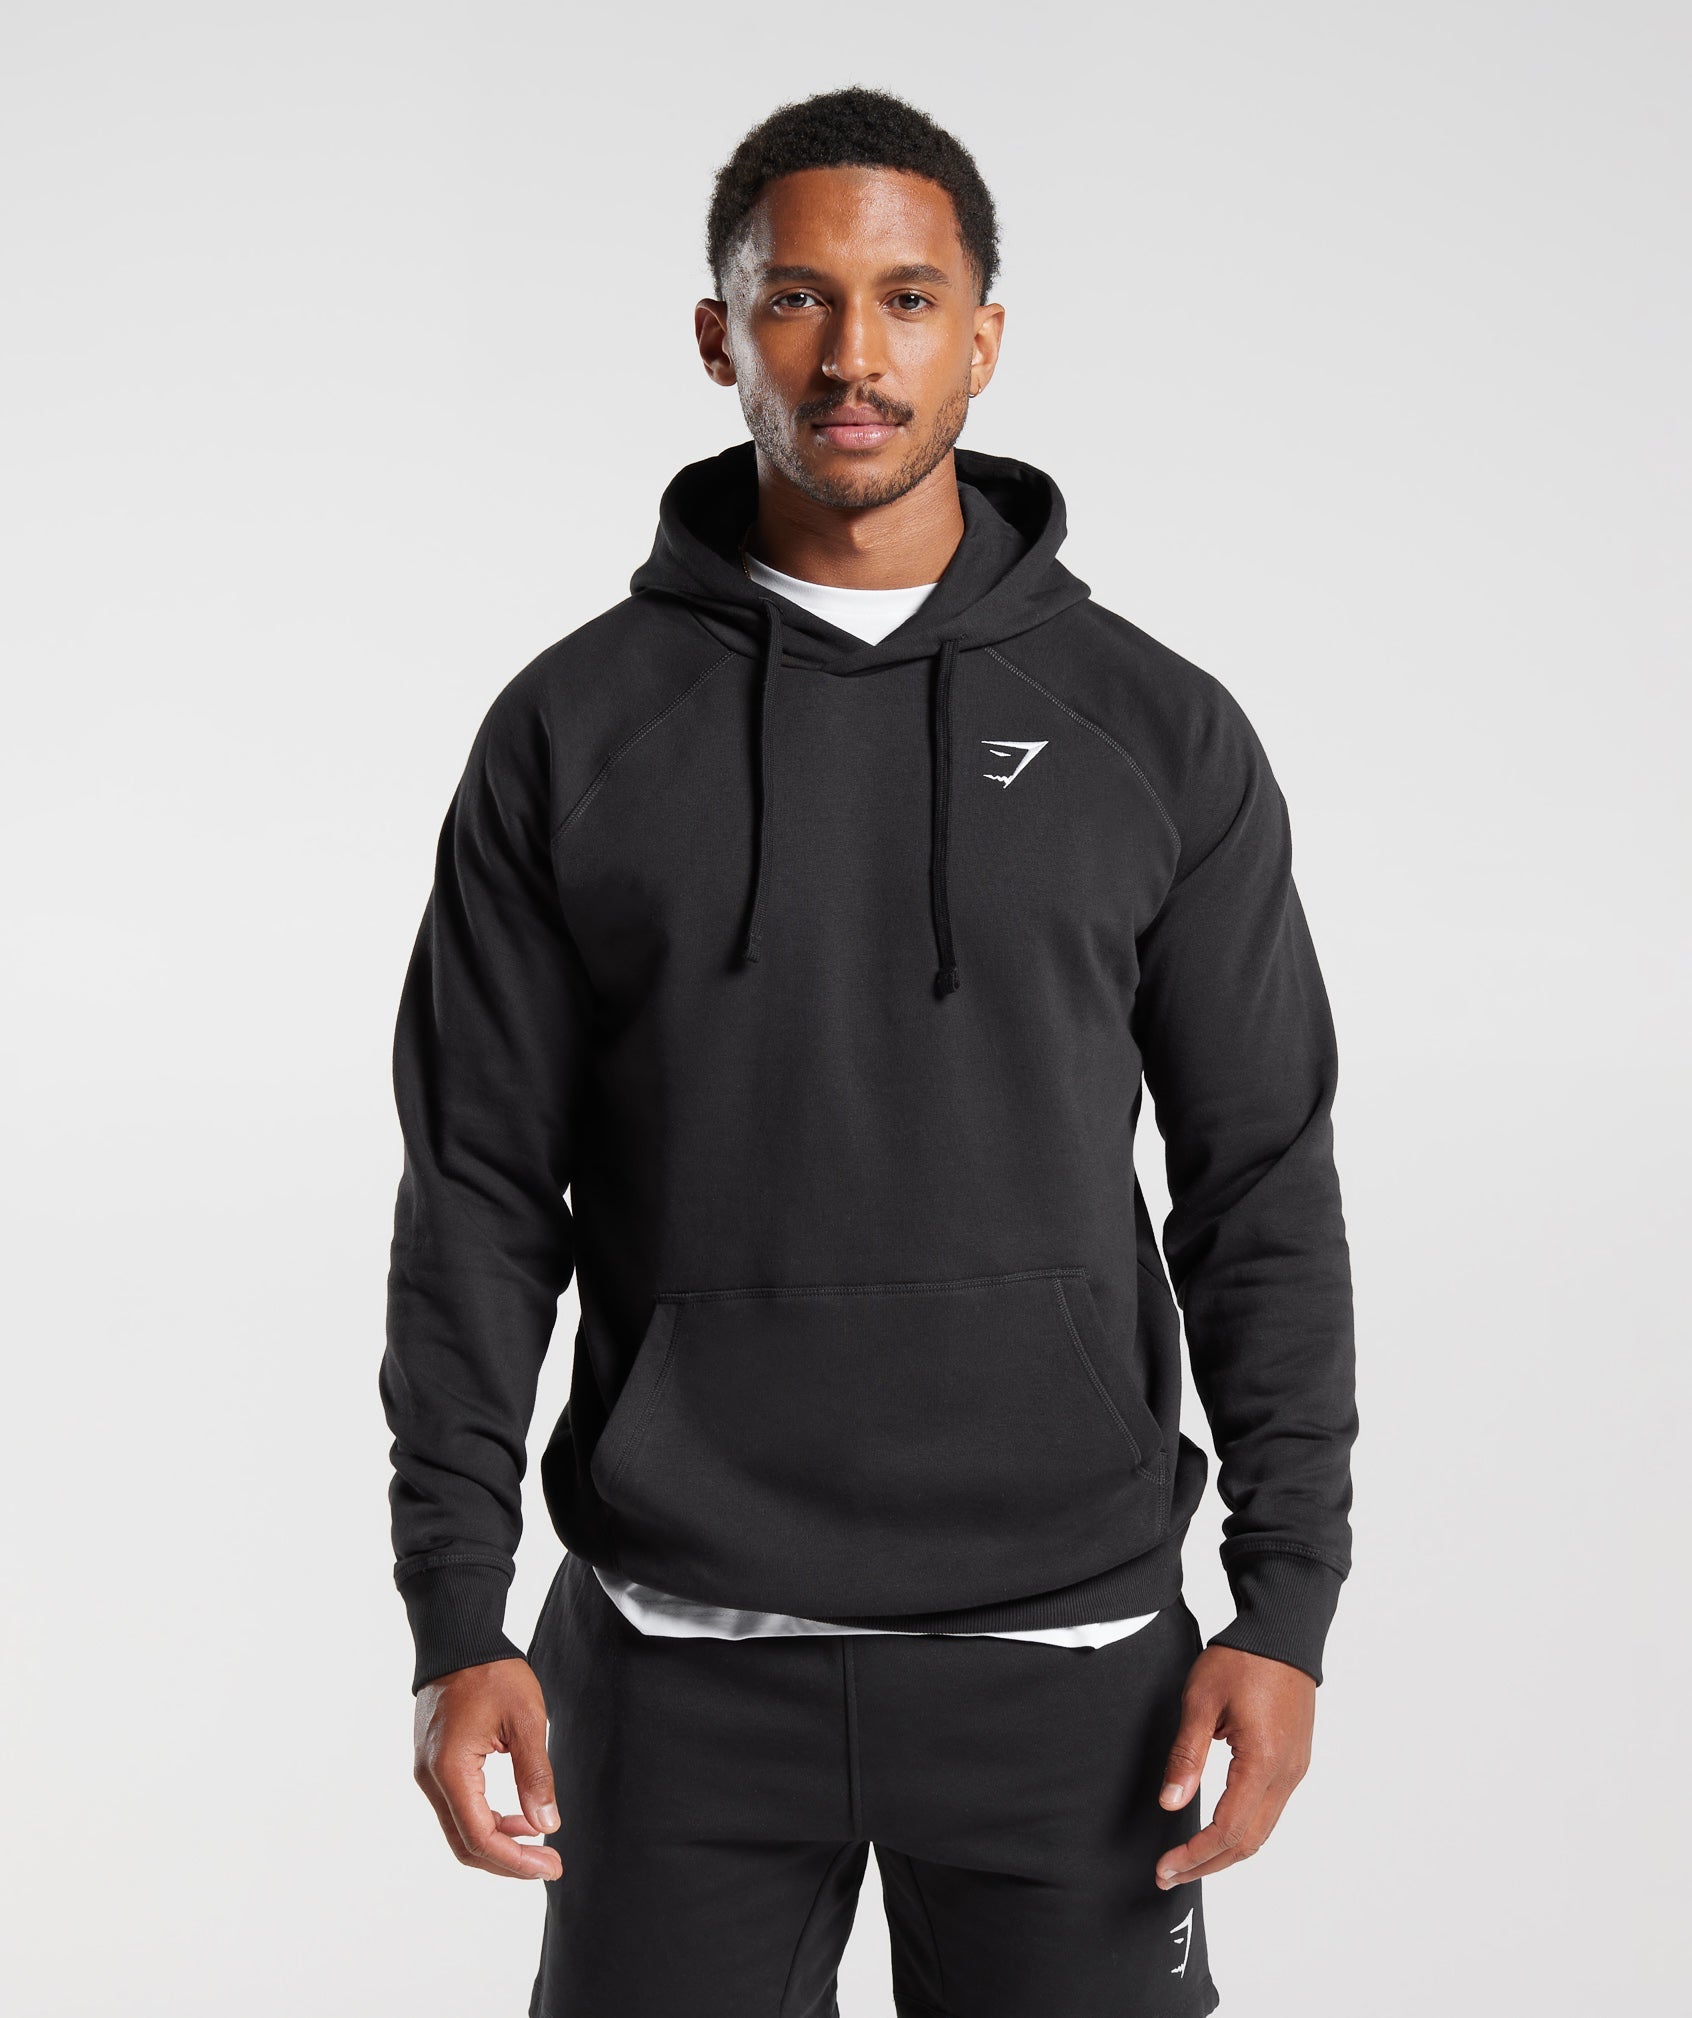 Men's Running Hoodies – Stay warm and layer up